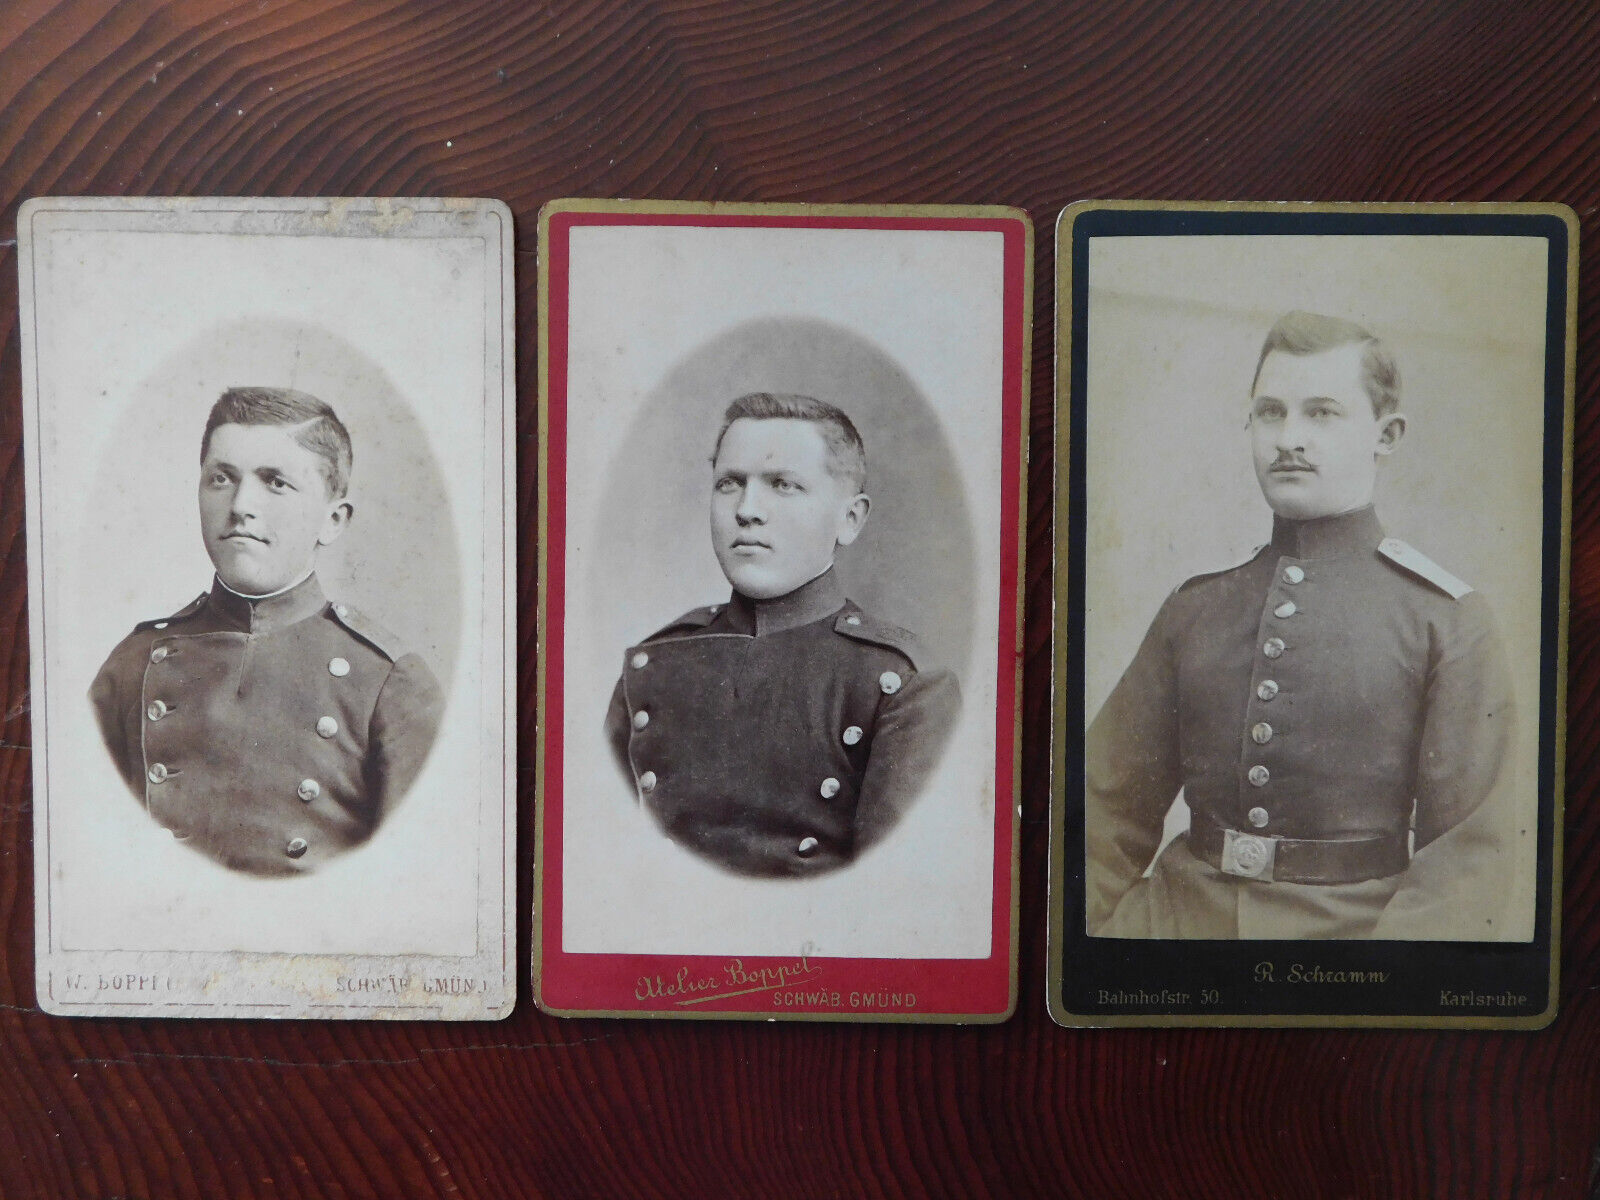 Antique German Military Soldiers in Uniform Cabinet Card Photograph - late 1800s